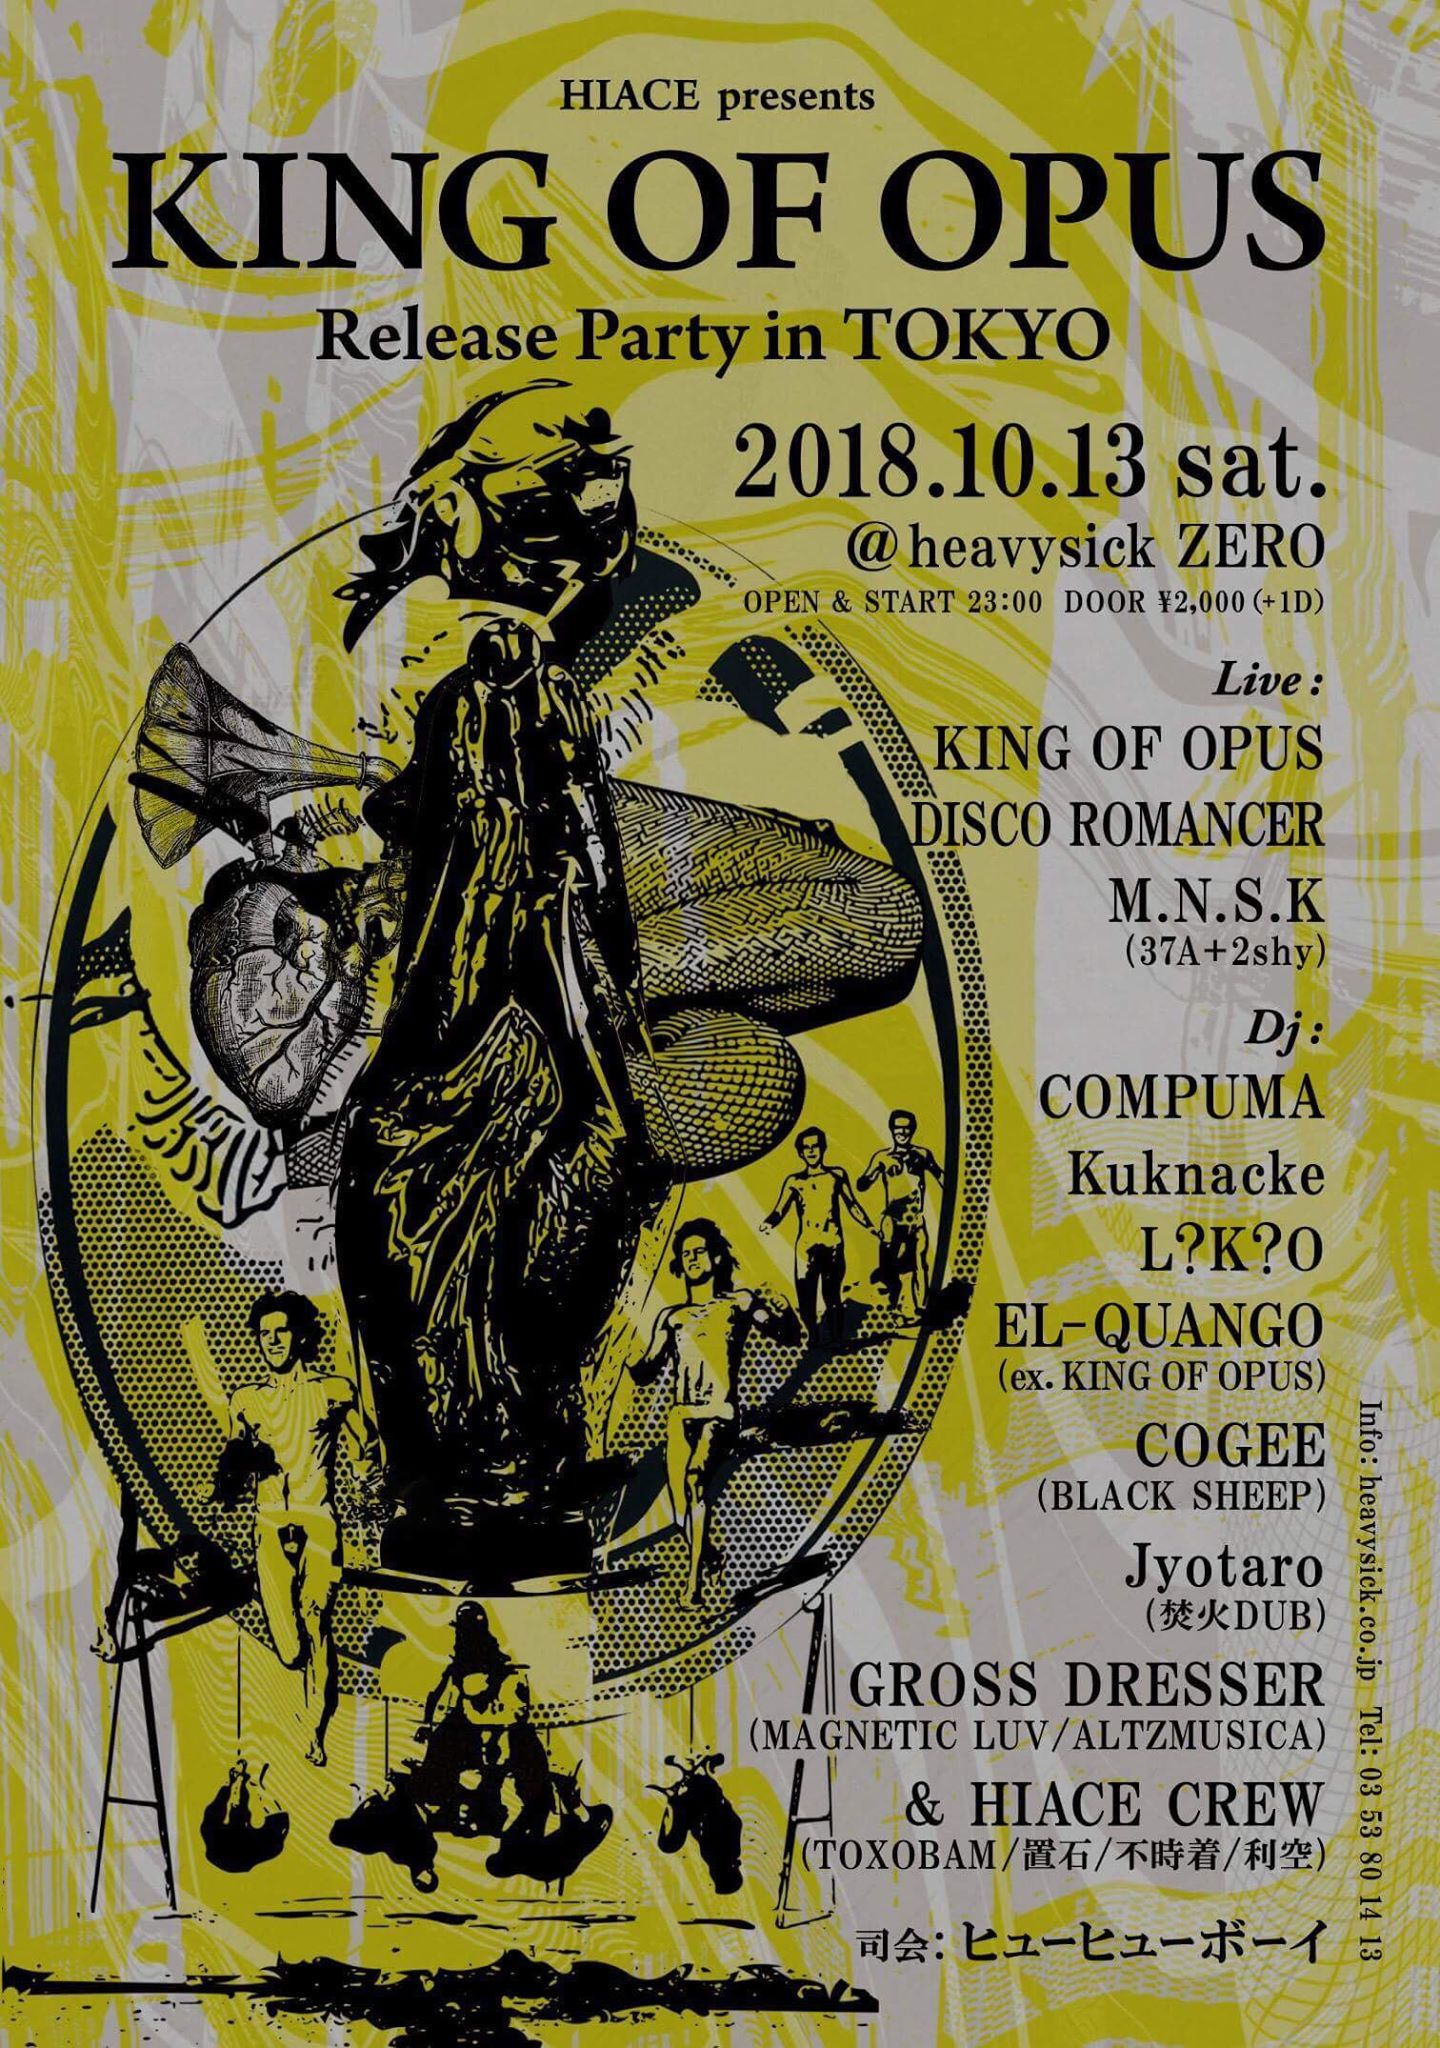 HIACE Presents KING OF OPUS Release Party in TOKYO